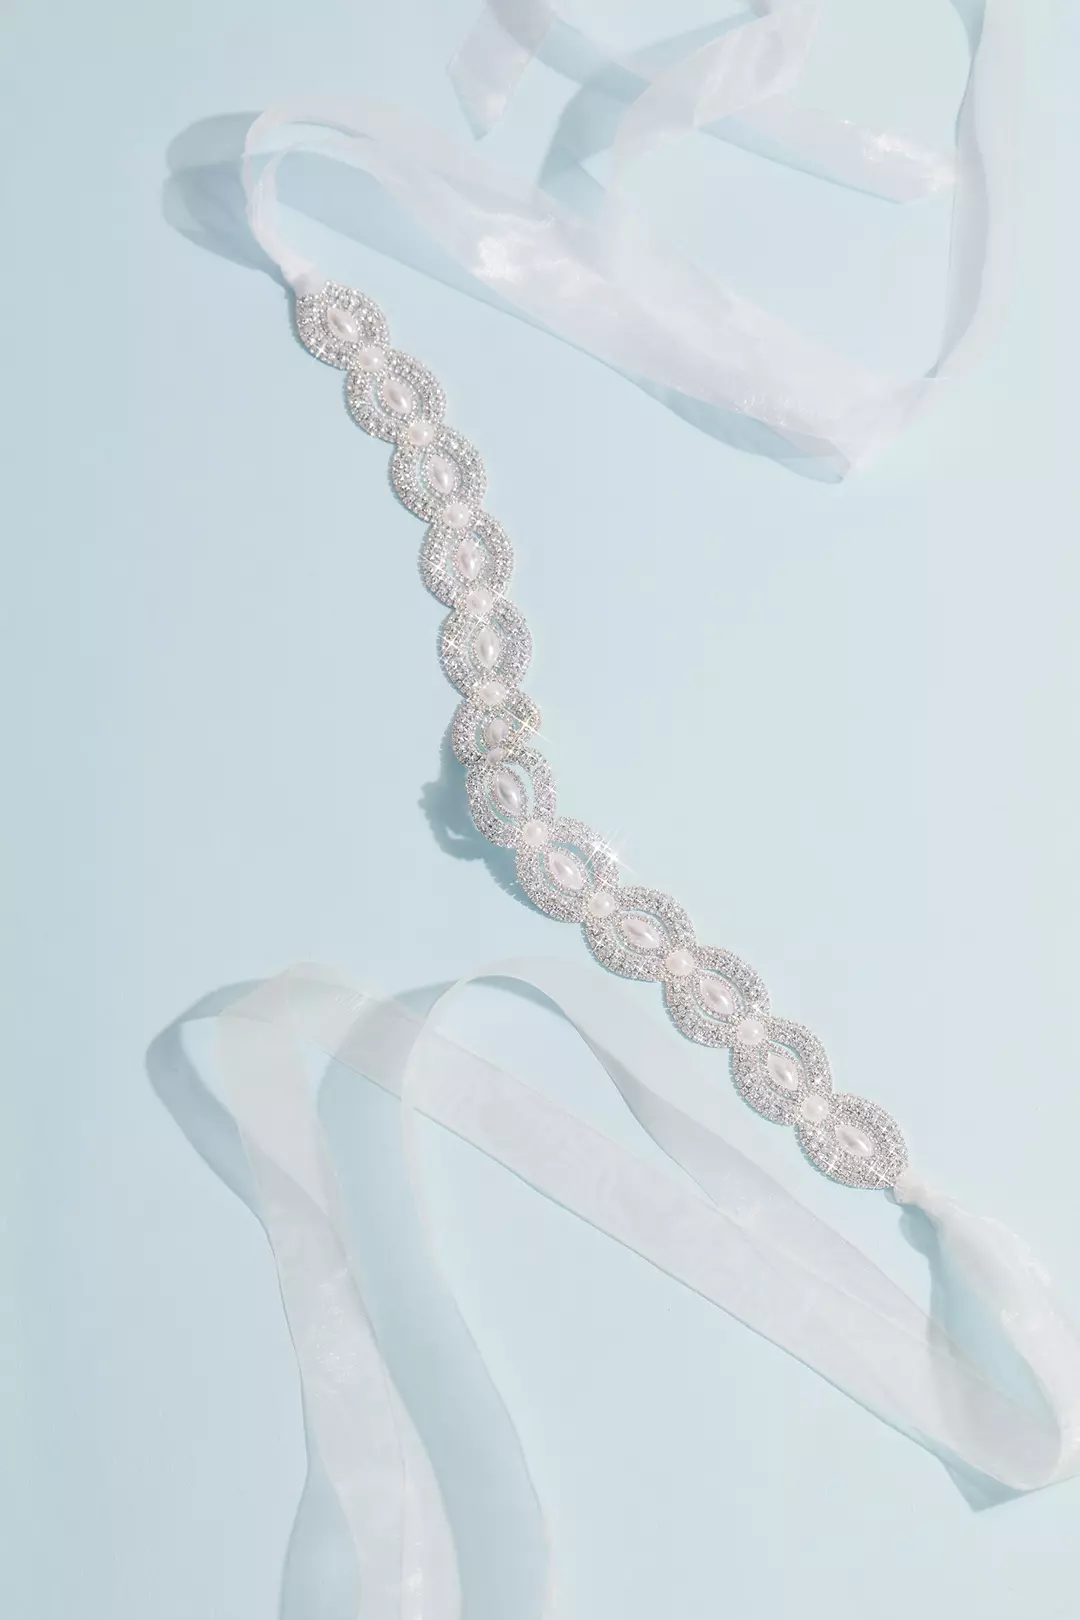 Oblong Crystal Ring Sash with Pearl Centers Image